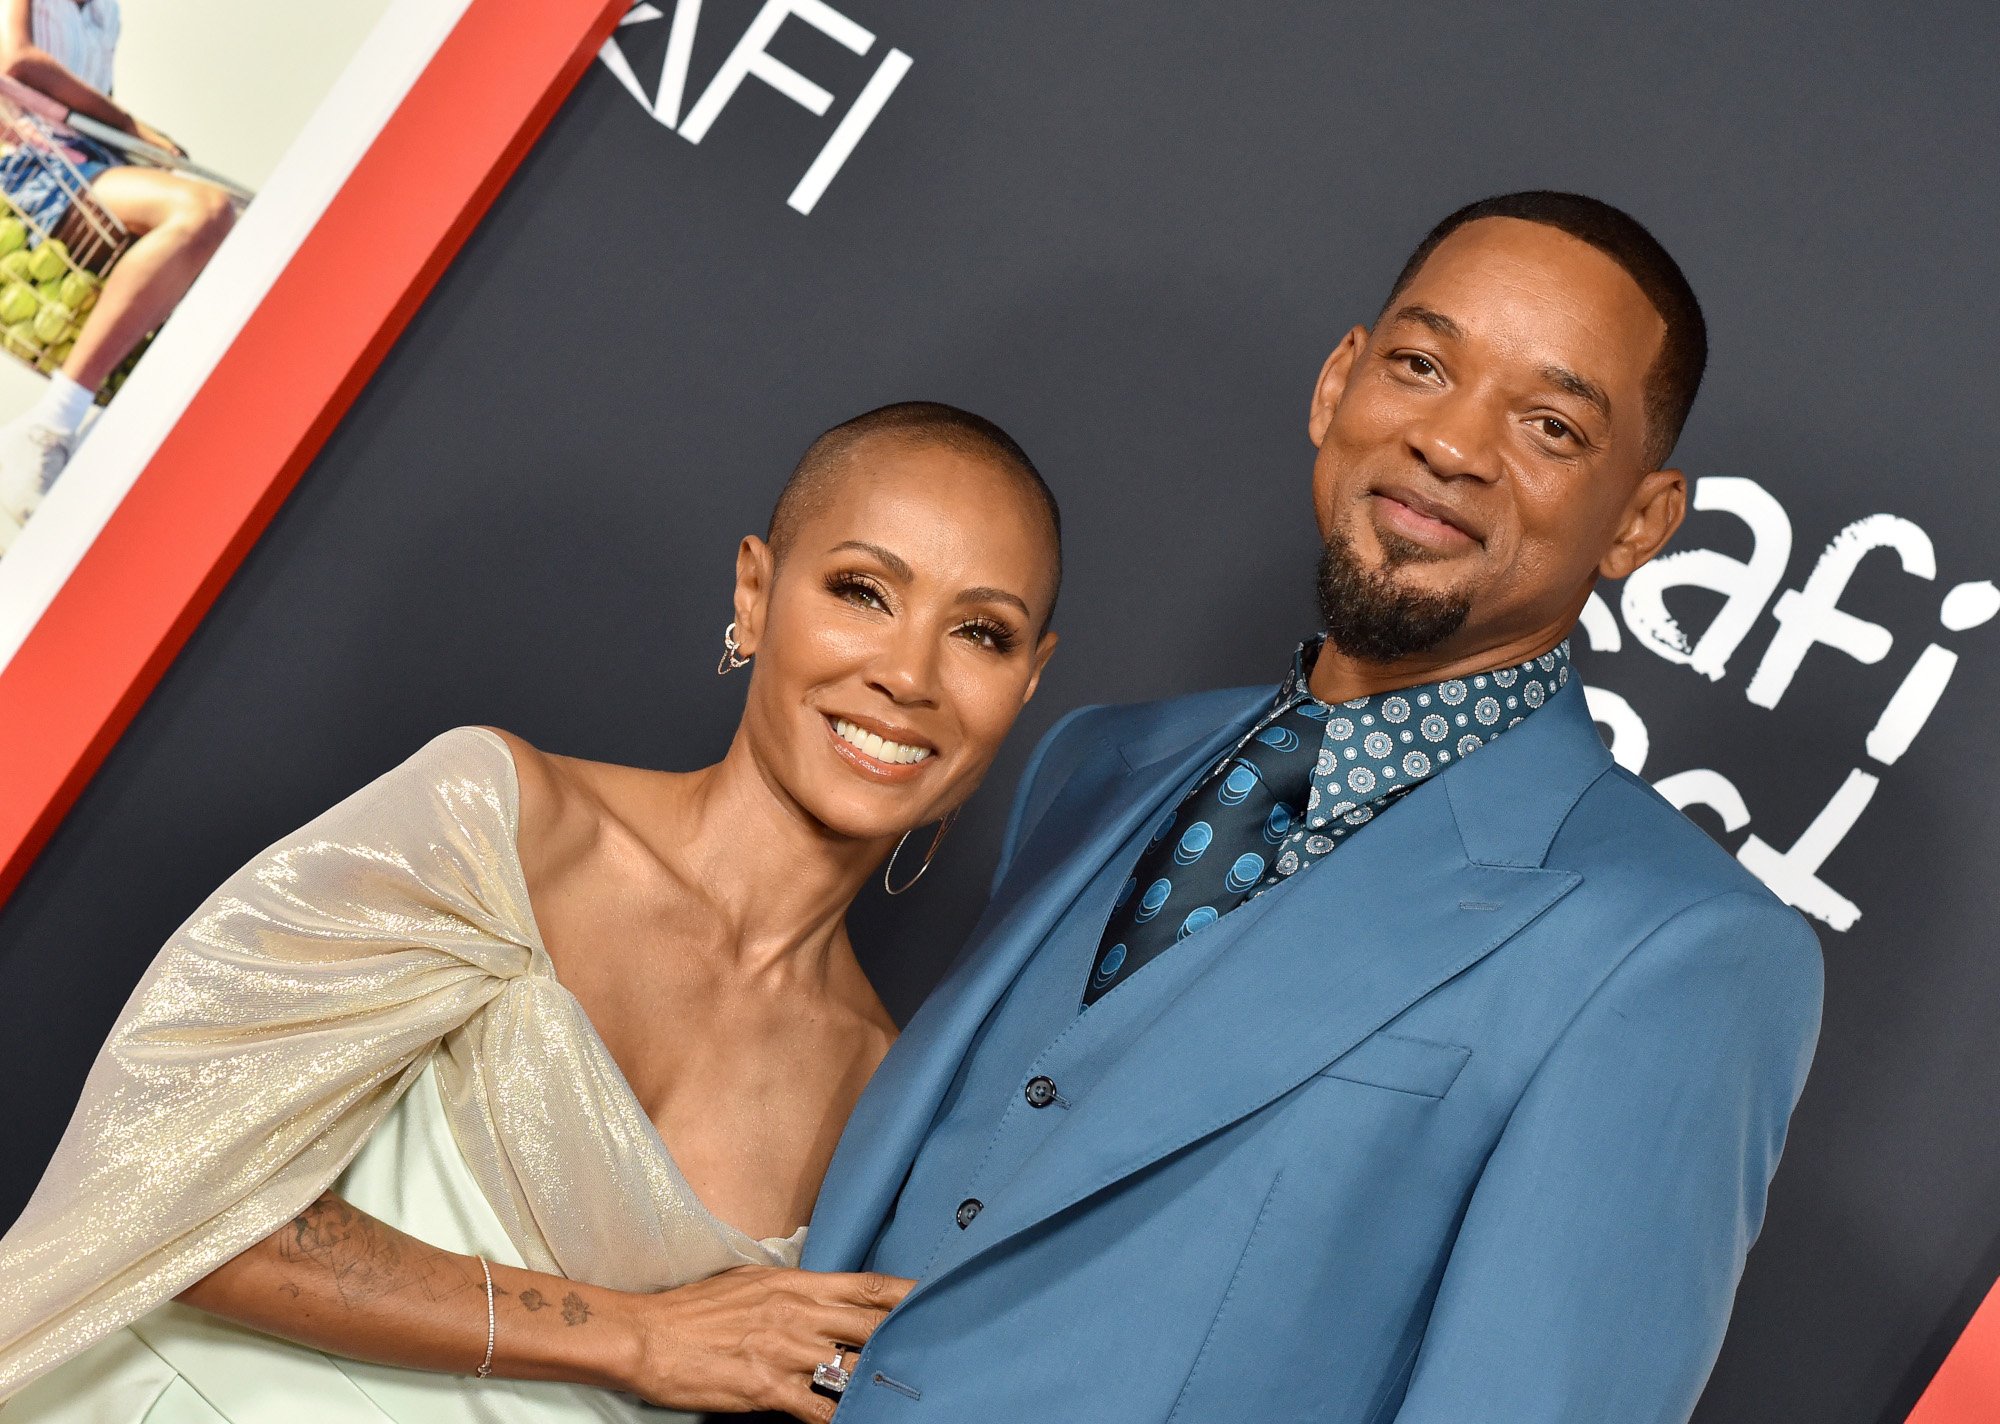 Jada Pinkett Smith and Will Smith. She's wearing a biege, off-the-shoulder dress. He's wearing a medium blue suit.